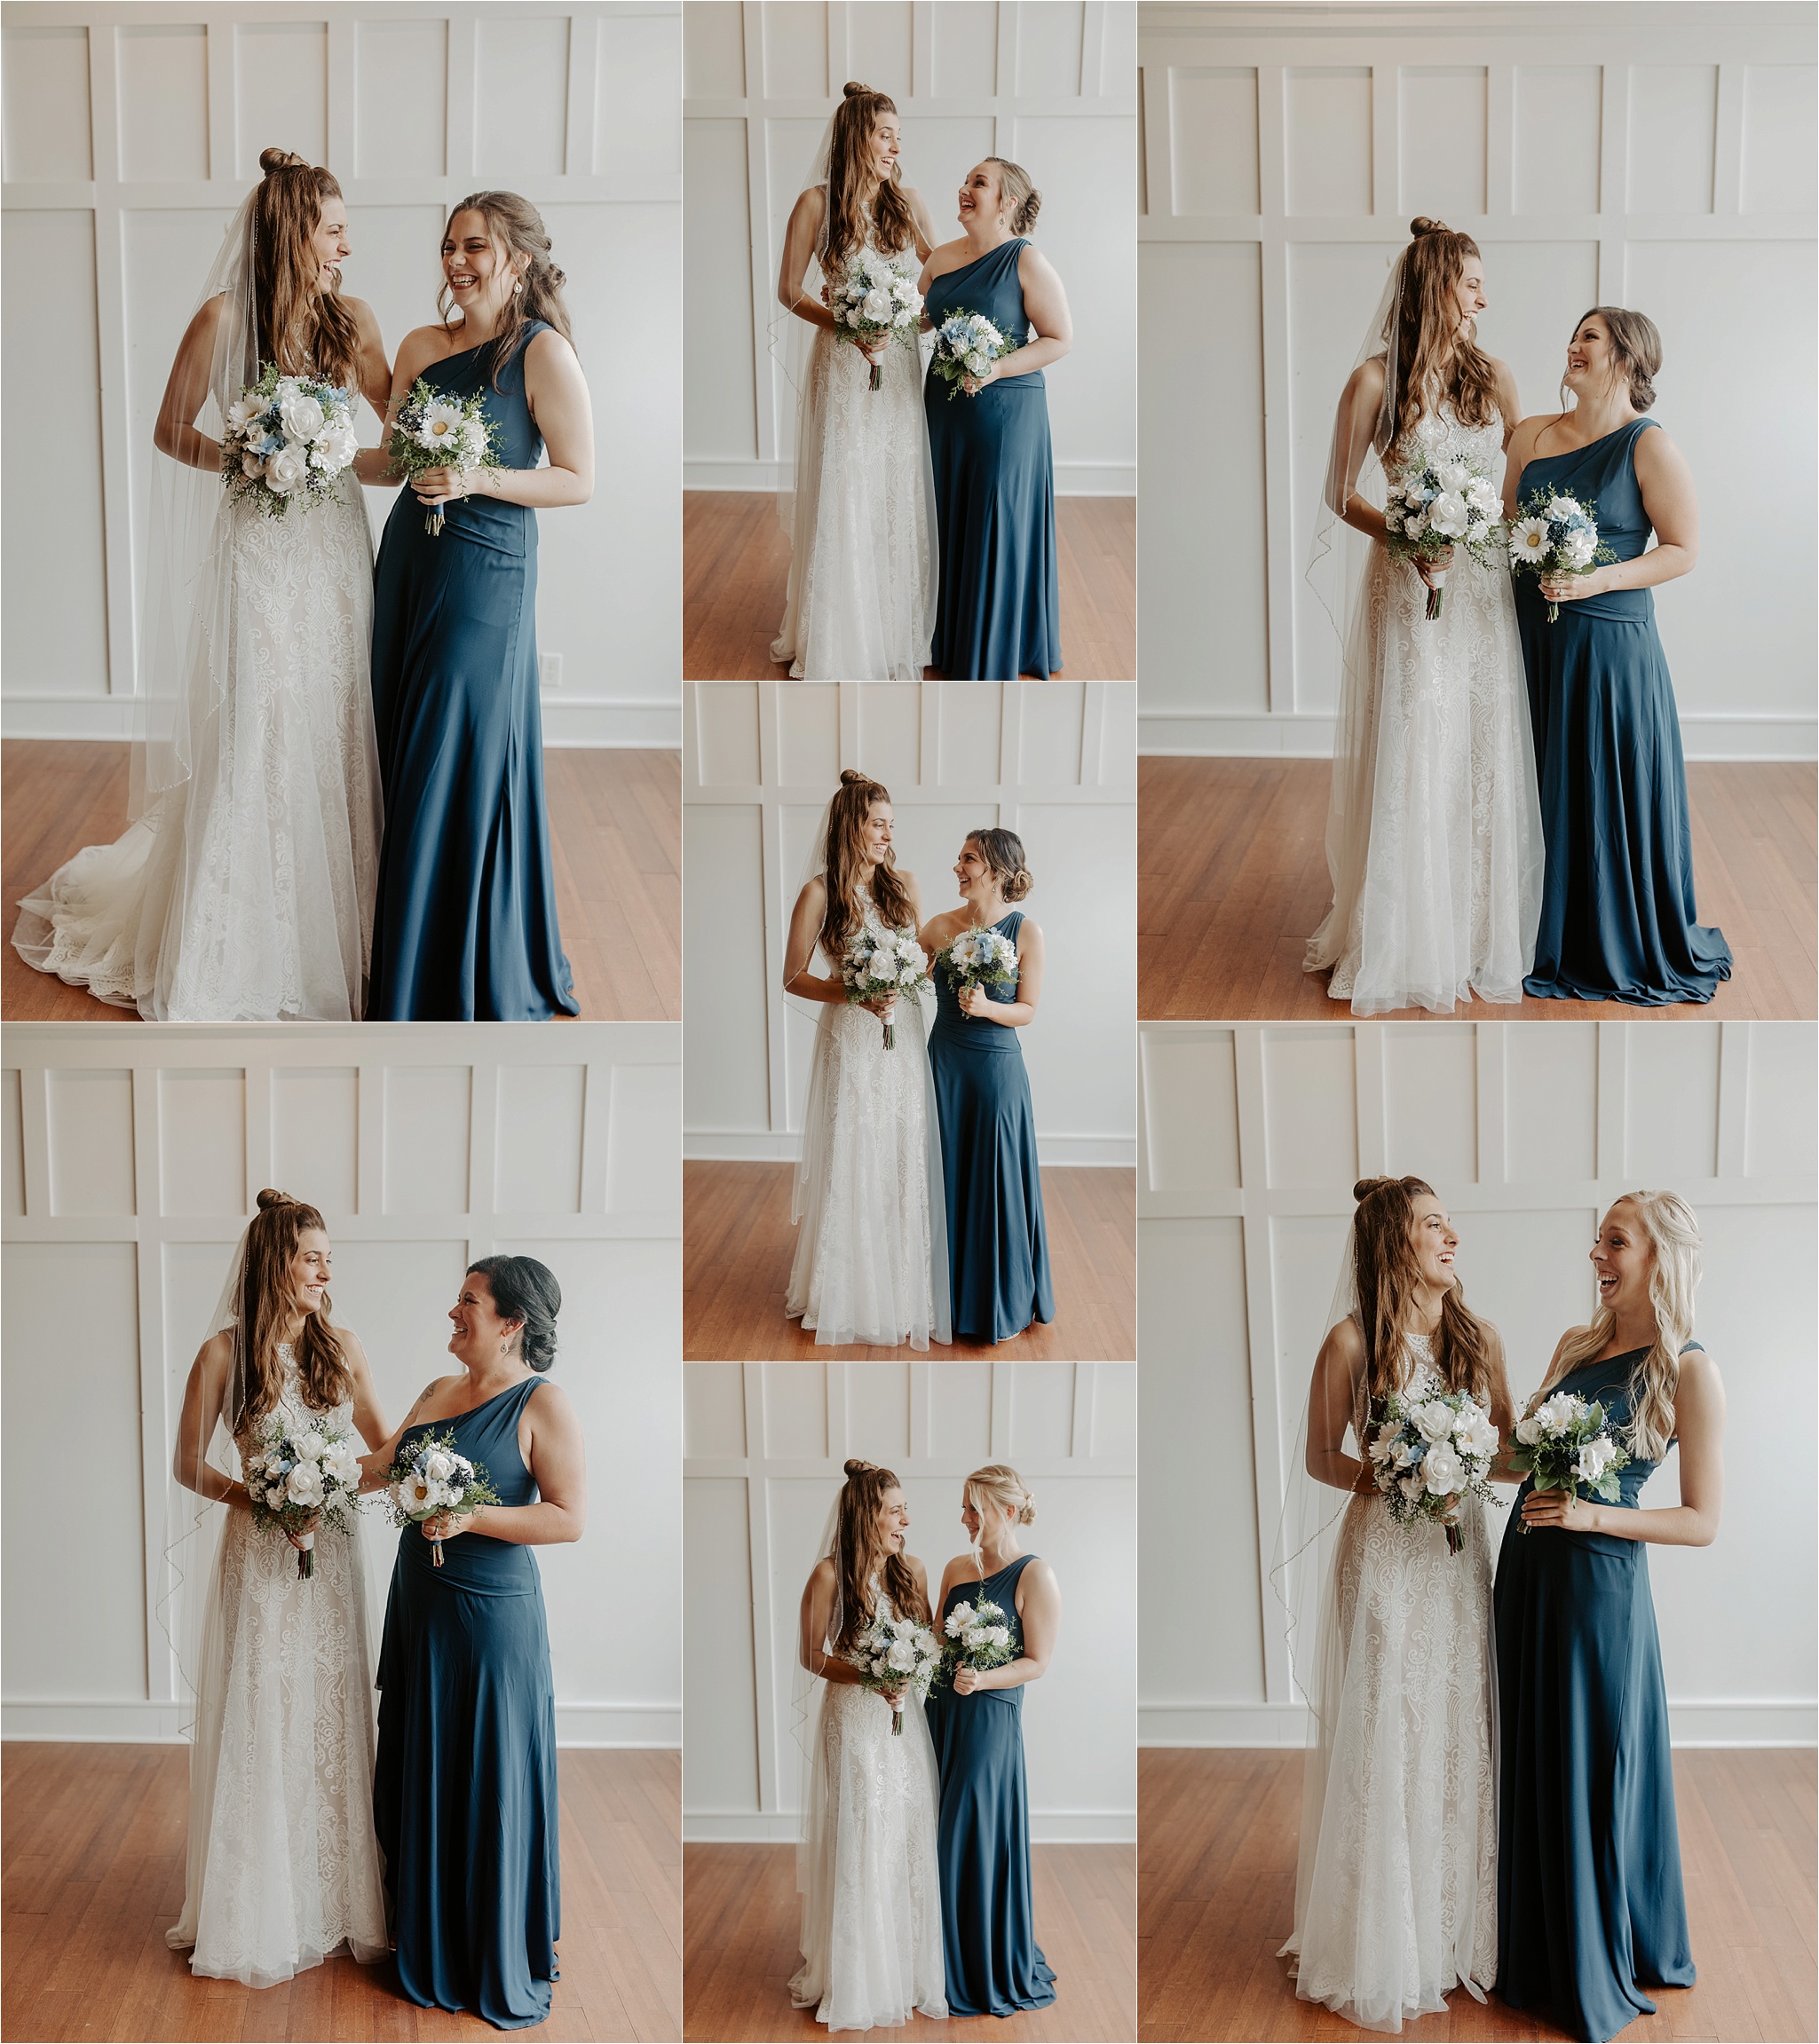 Bridal Party photos at Town & Country Events in Milford, IL. Krystal Richmond Photography